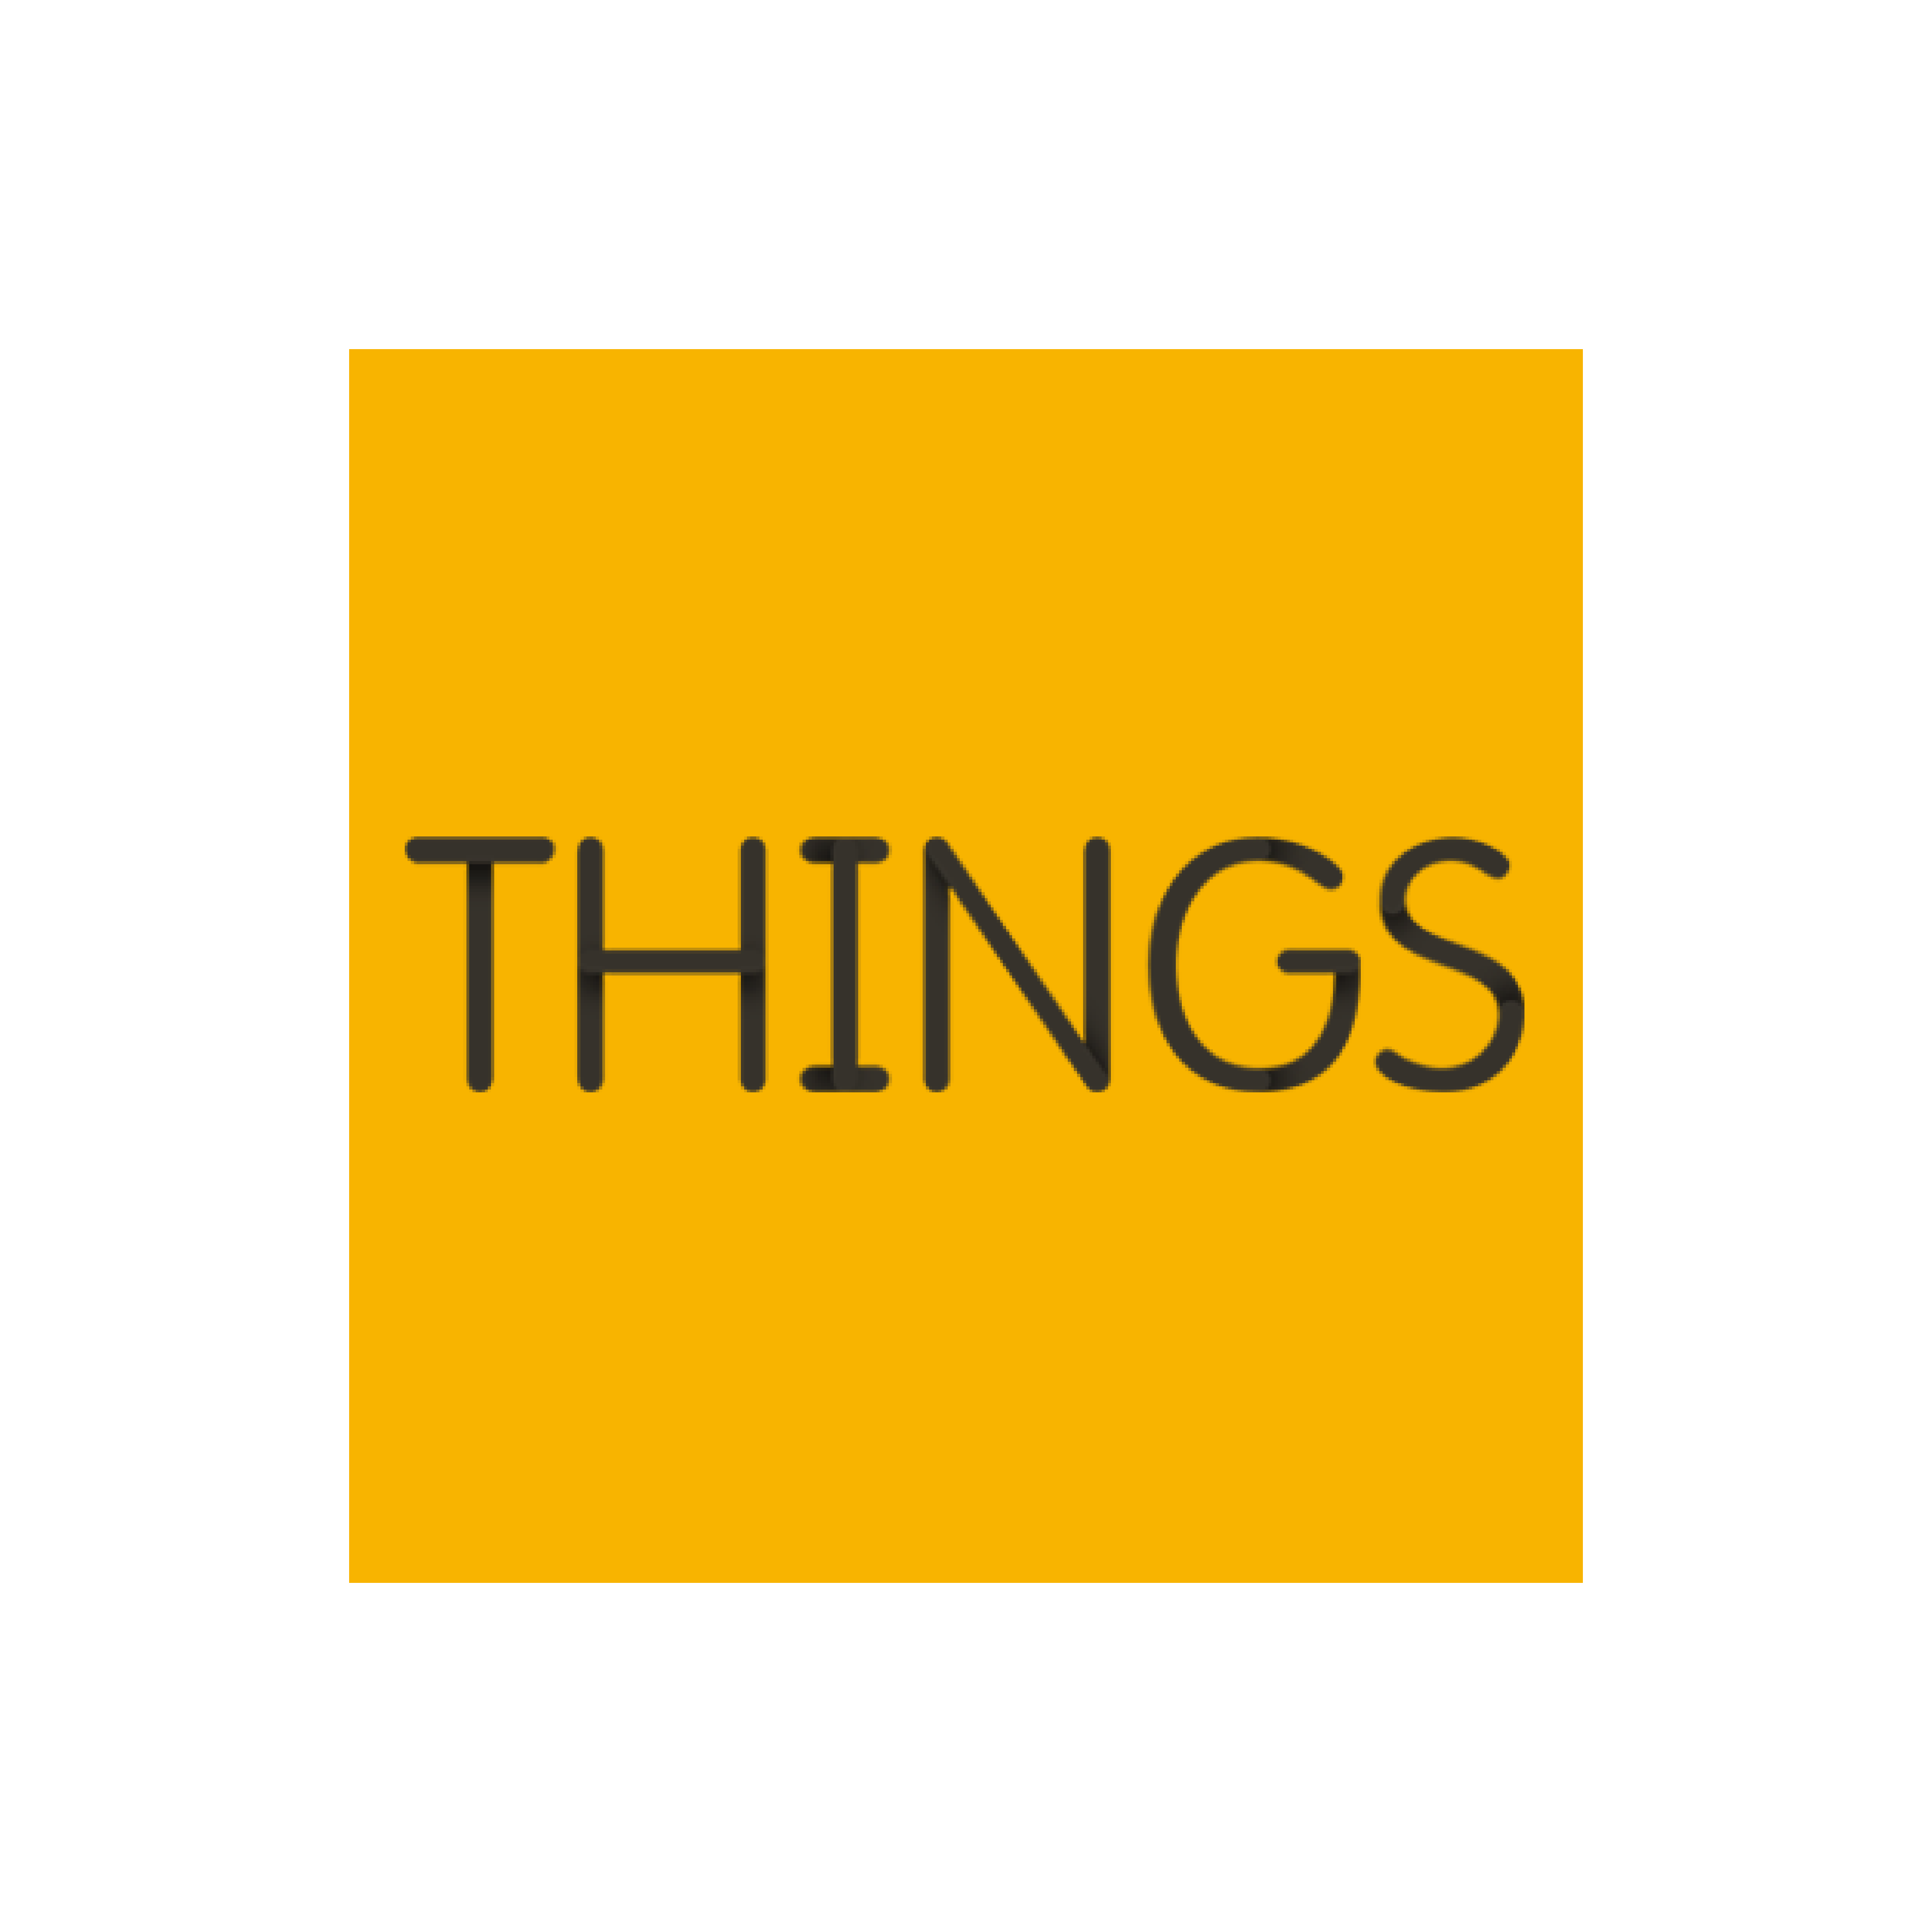 Things logo - word things in black text with a yellow background